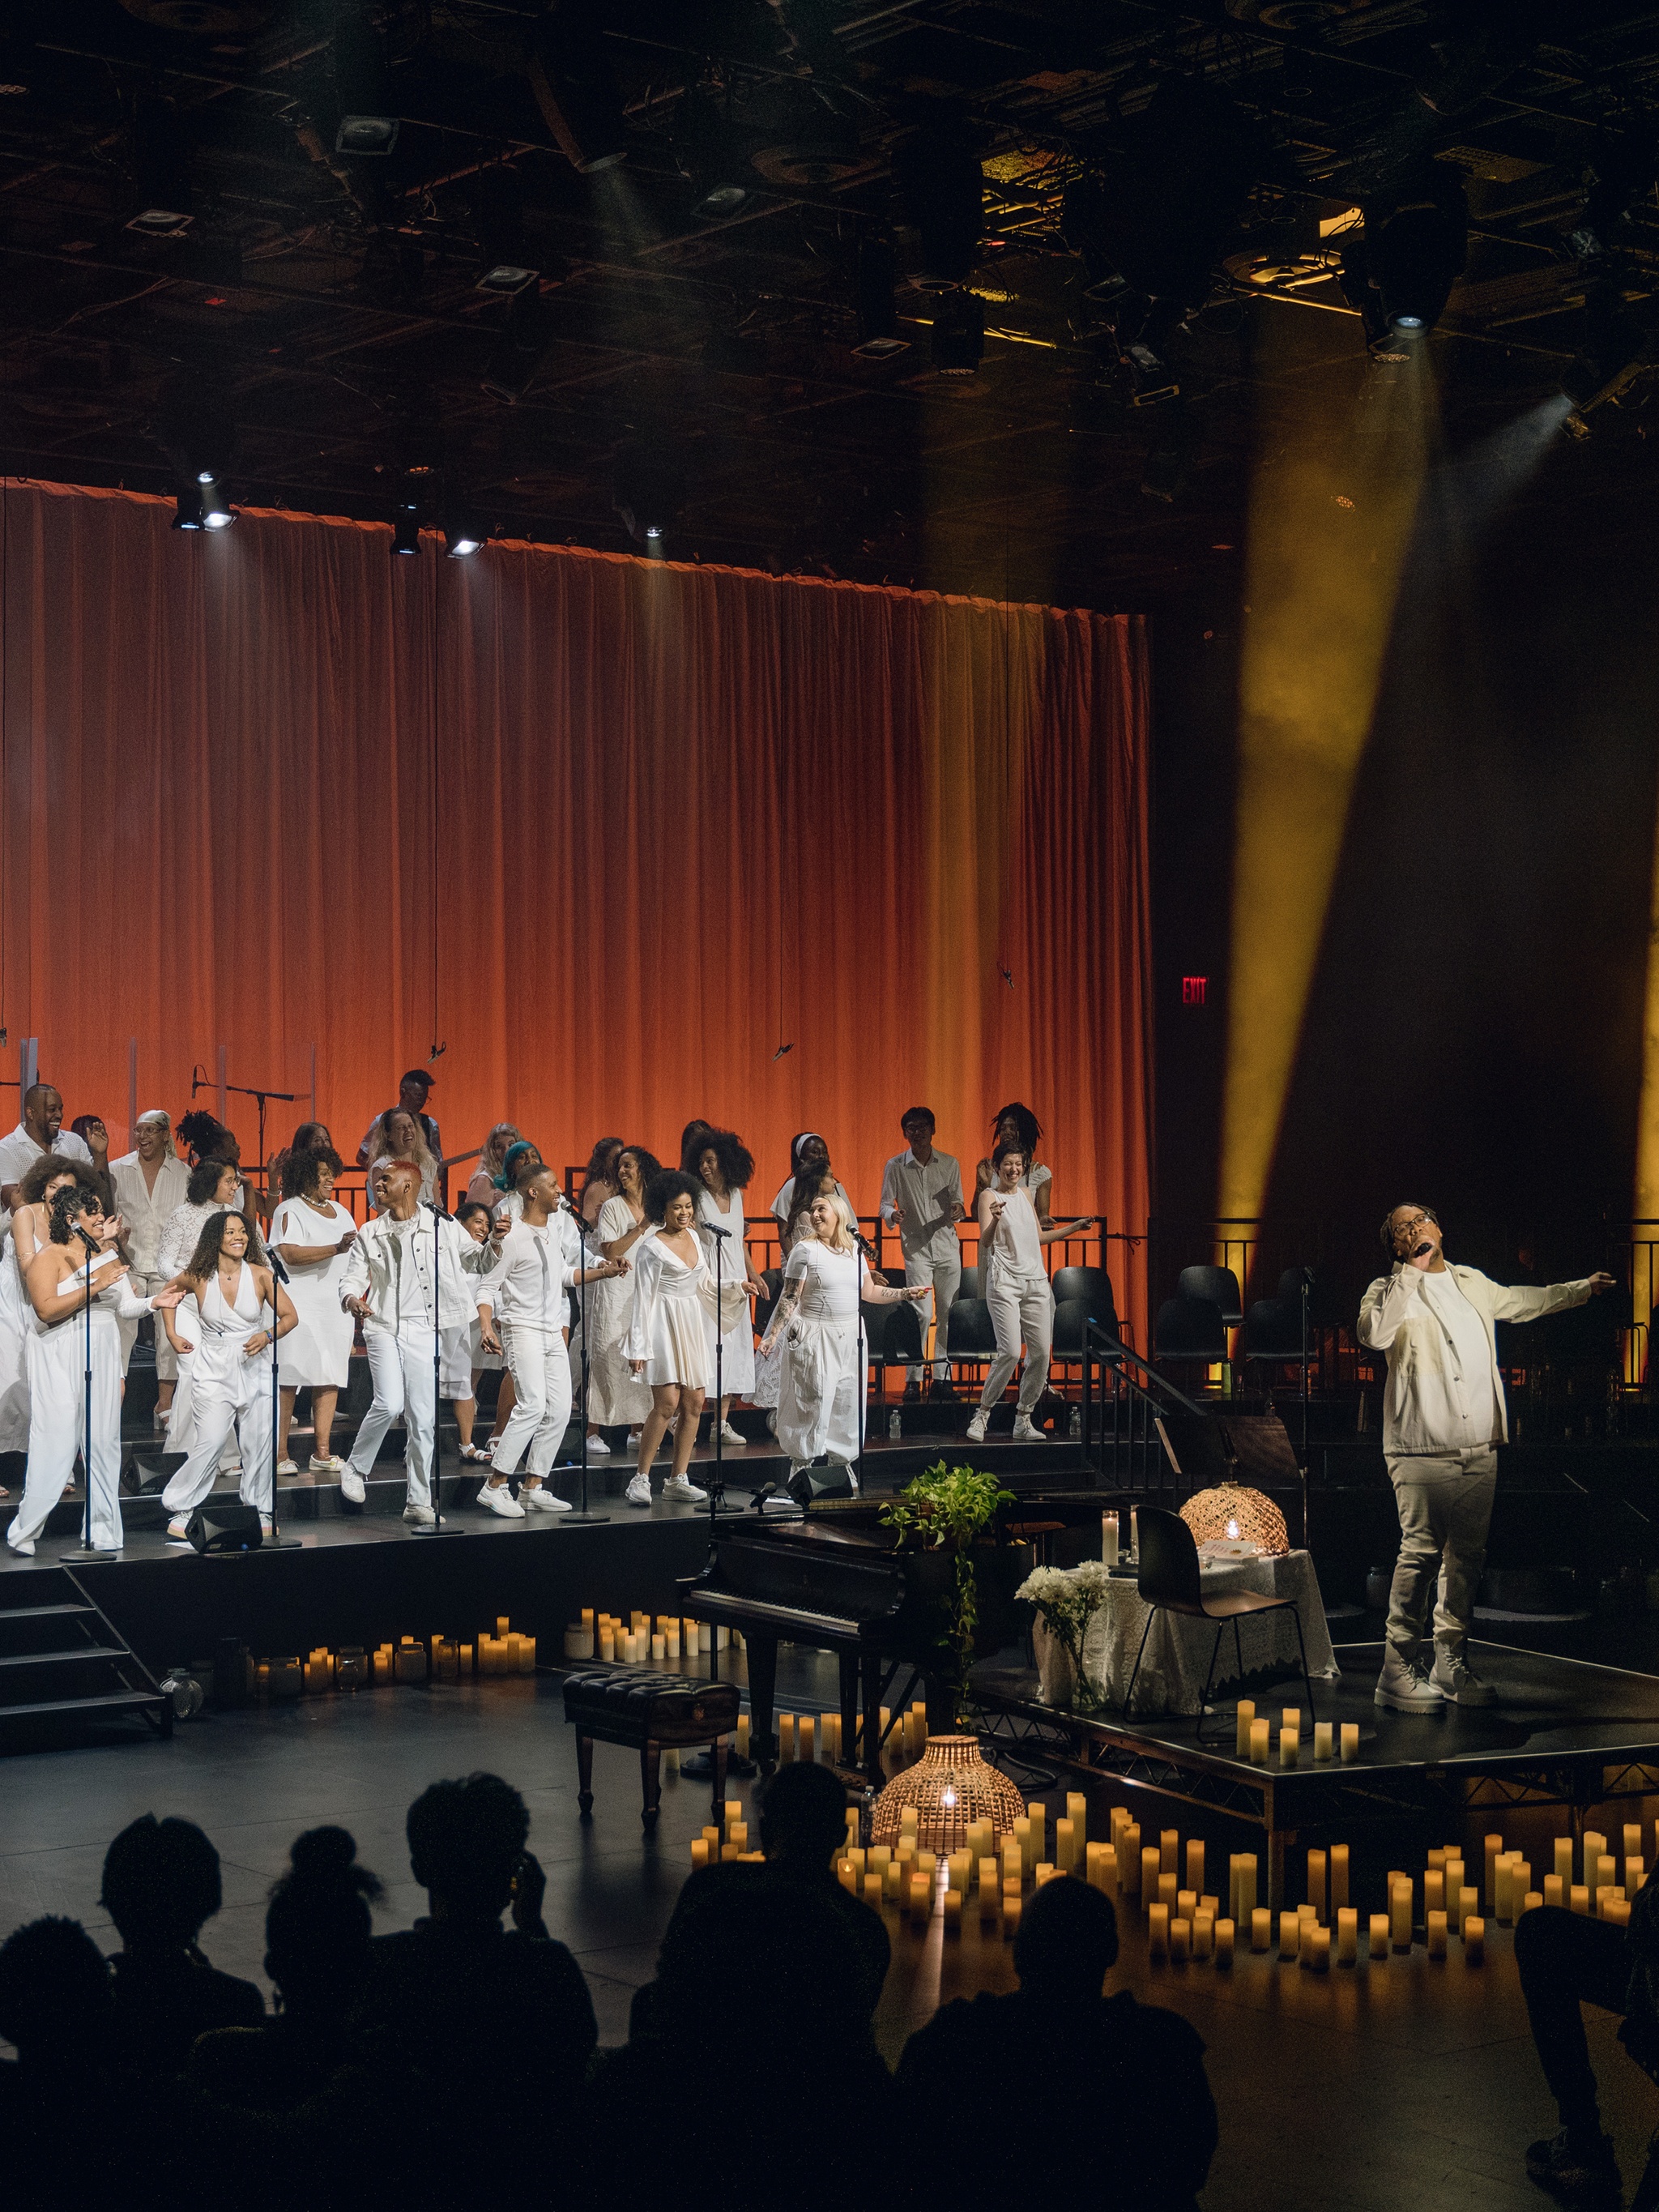 Troy Anthony, a Black man dressed in white, stands on a small stage in a black box theater with a choir on risers behind him. Troy stretches out his hands and the choir members dance. They are also dressed all in white. Around Troy are numerous lit candles. Behind the choir, a curtain is lit in deep umber tones.